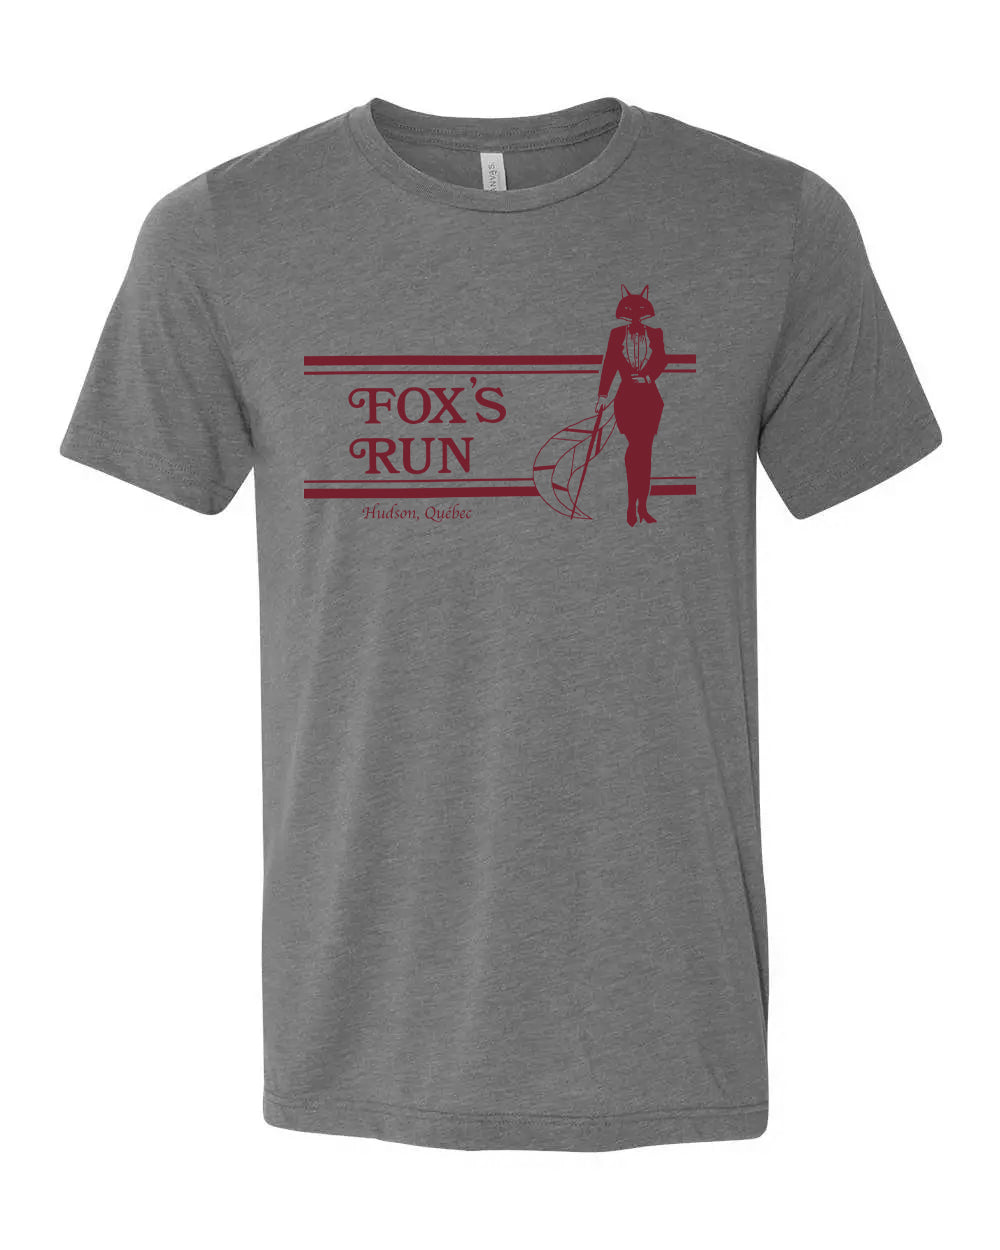 VINTAGE FOX'S RUN T-Shirts | Unsettled Apparel